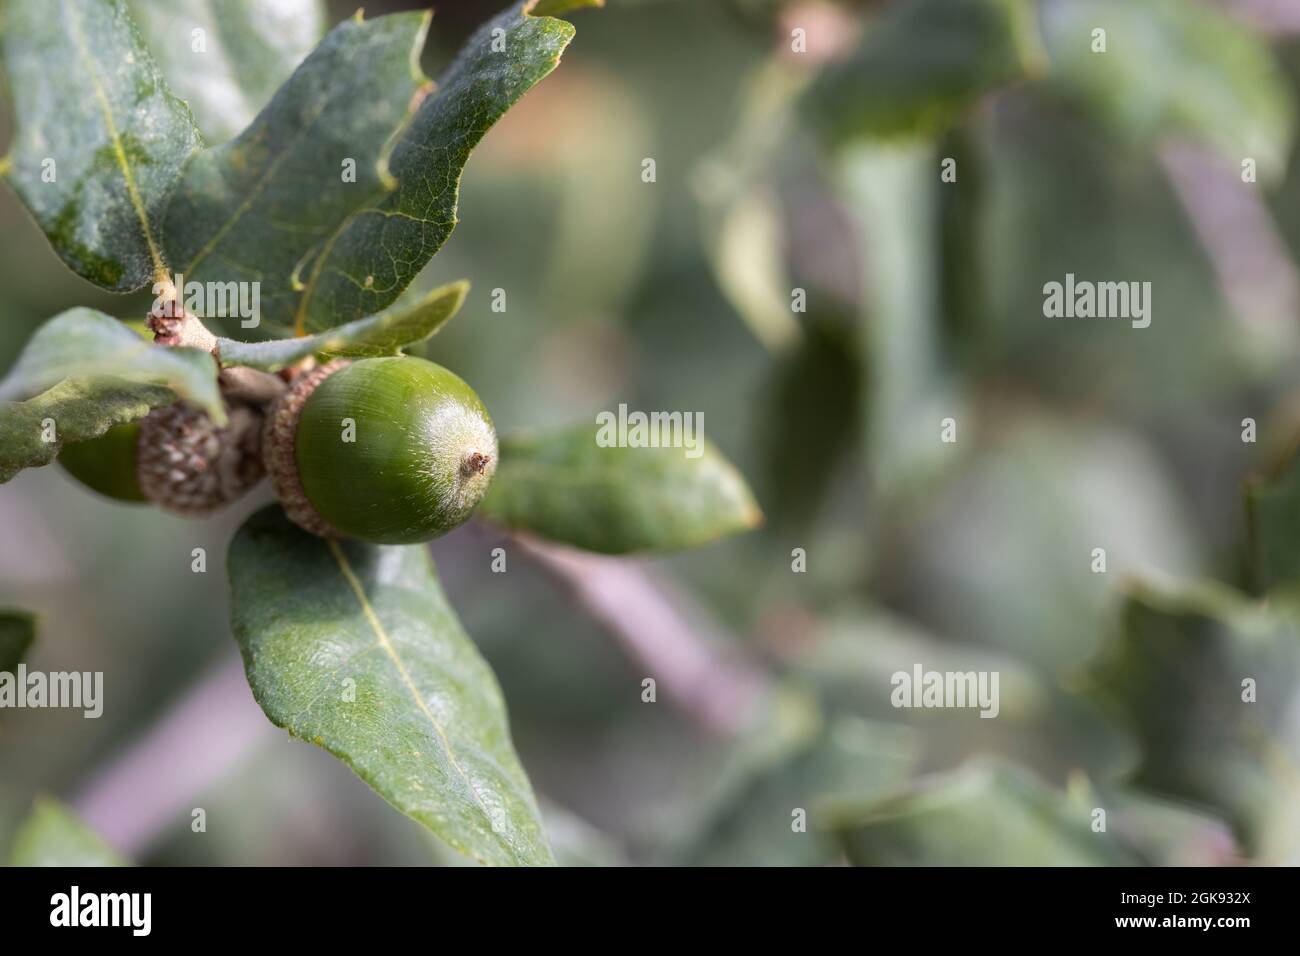 Green scrubby Oak tree leaves and acorn as a background Stock Photo